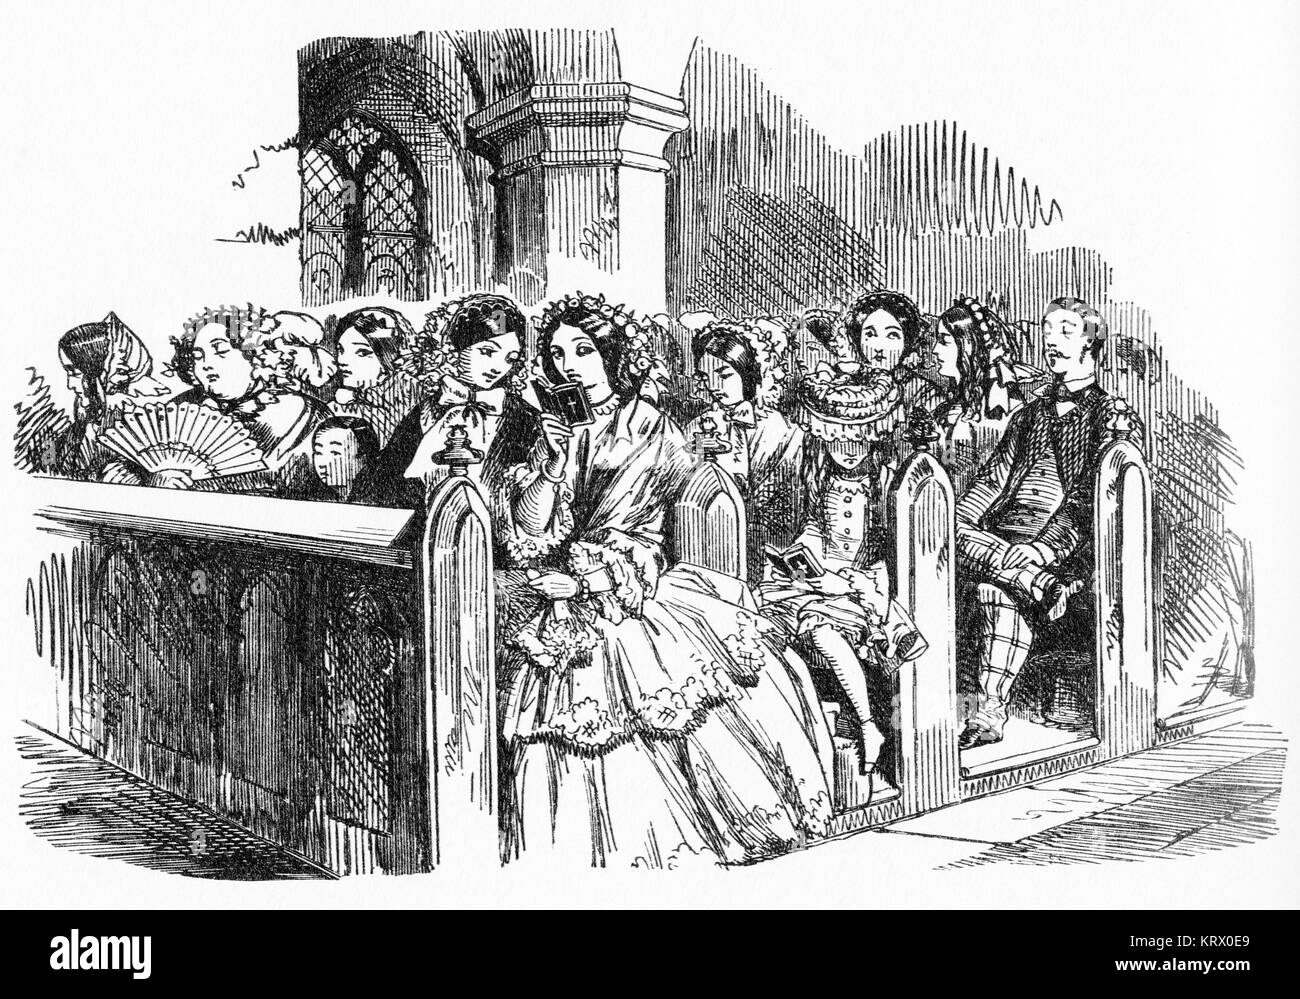 Engraving of a church congregation waiting in the pews, from Punch magazine Stock Photo